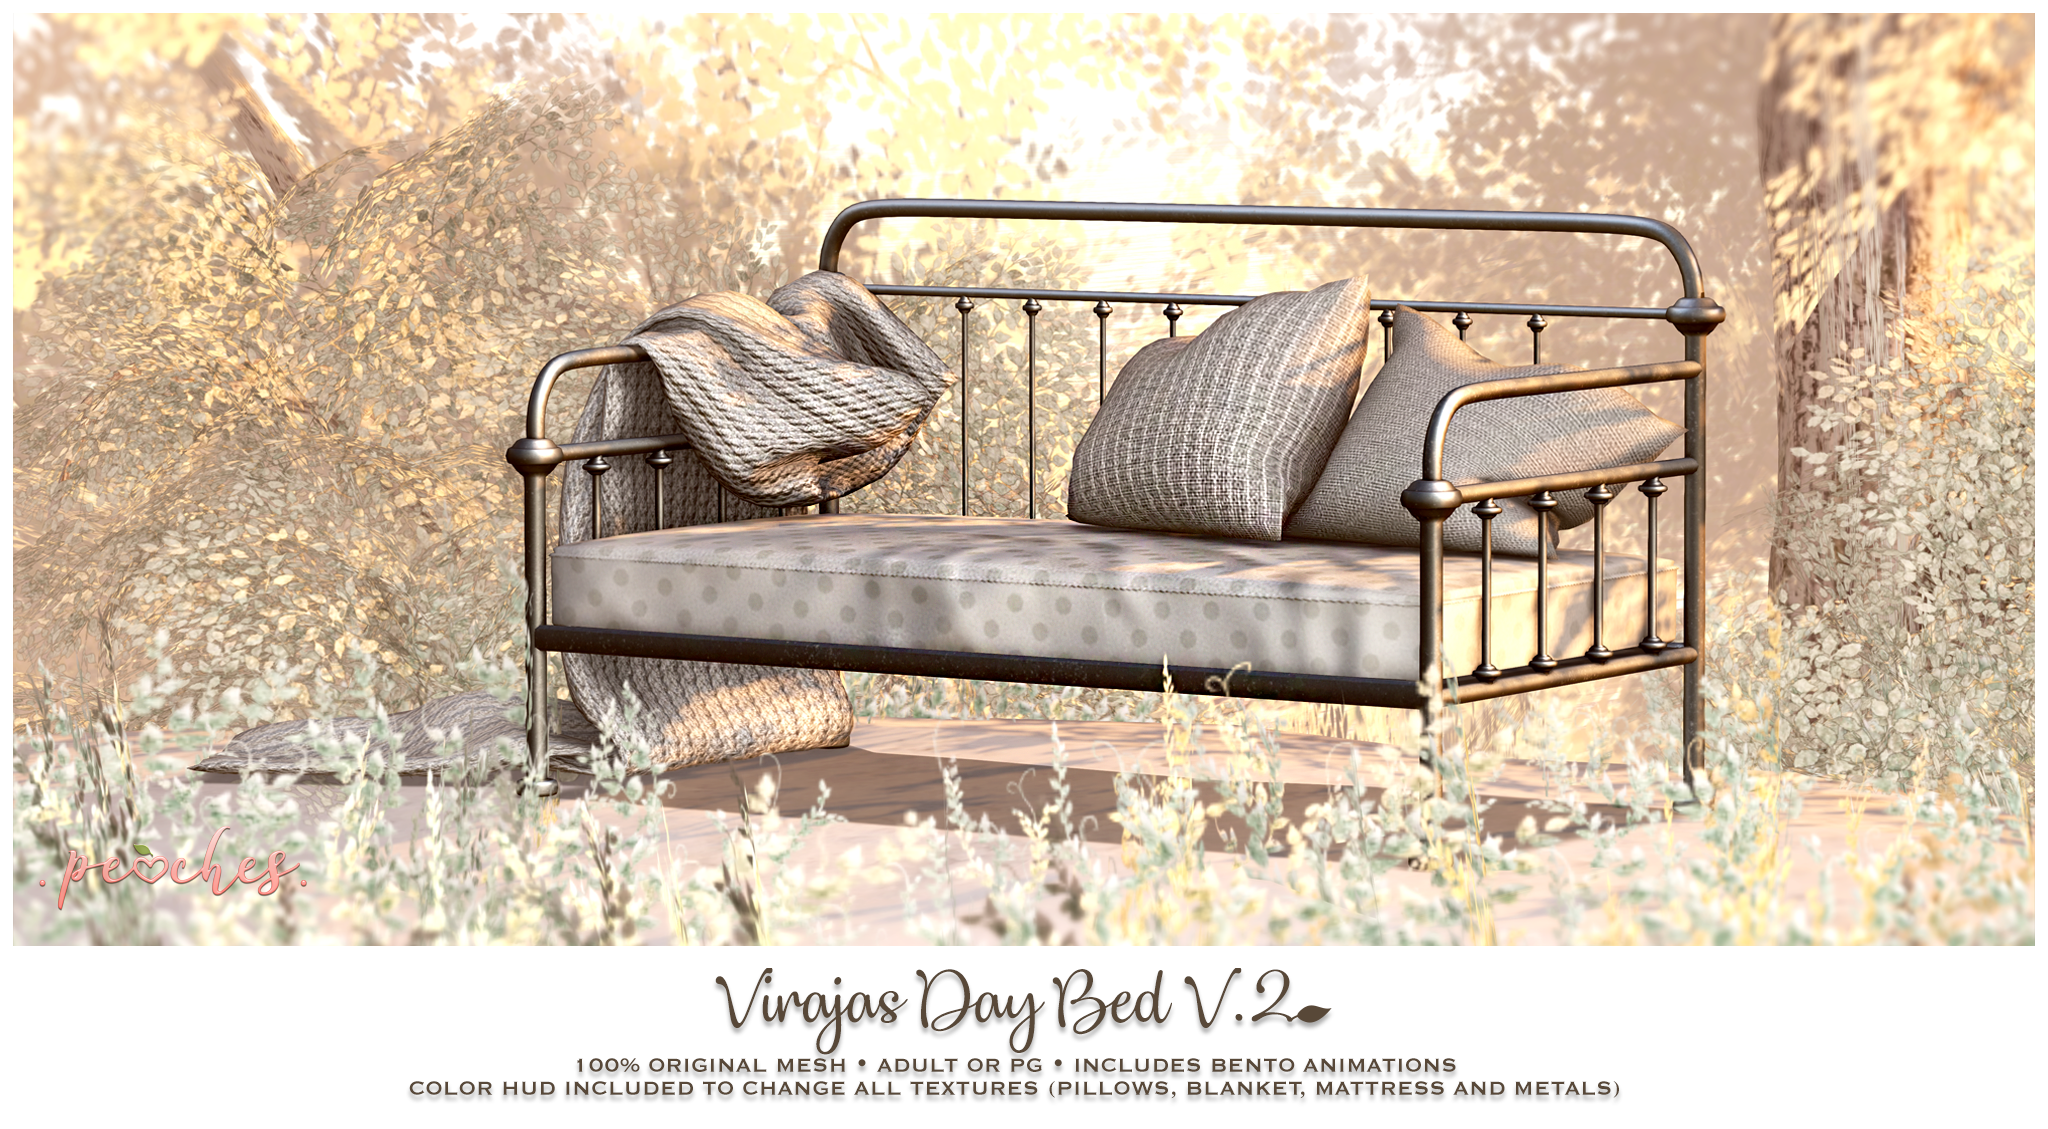 Peaches – Virajas Day Bed V2